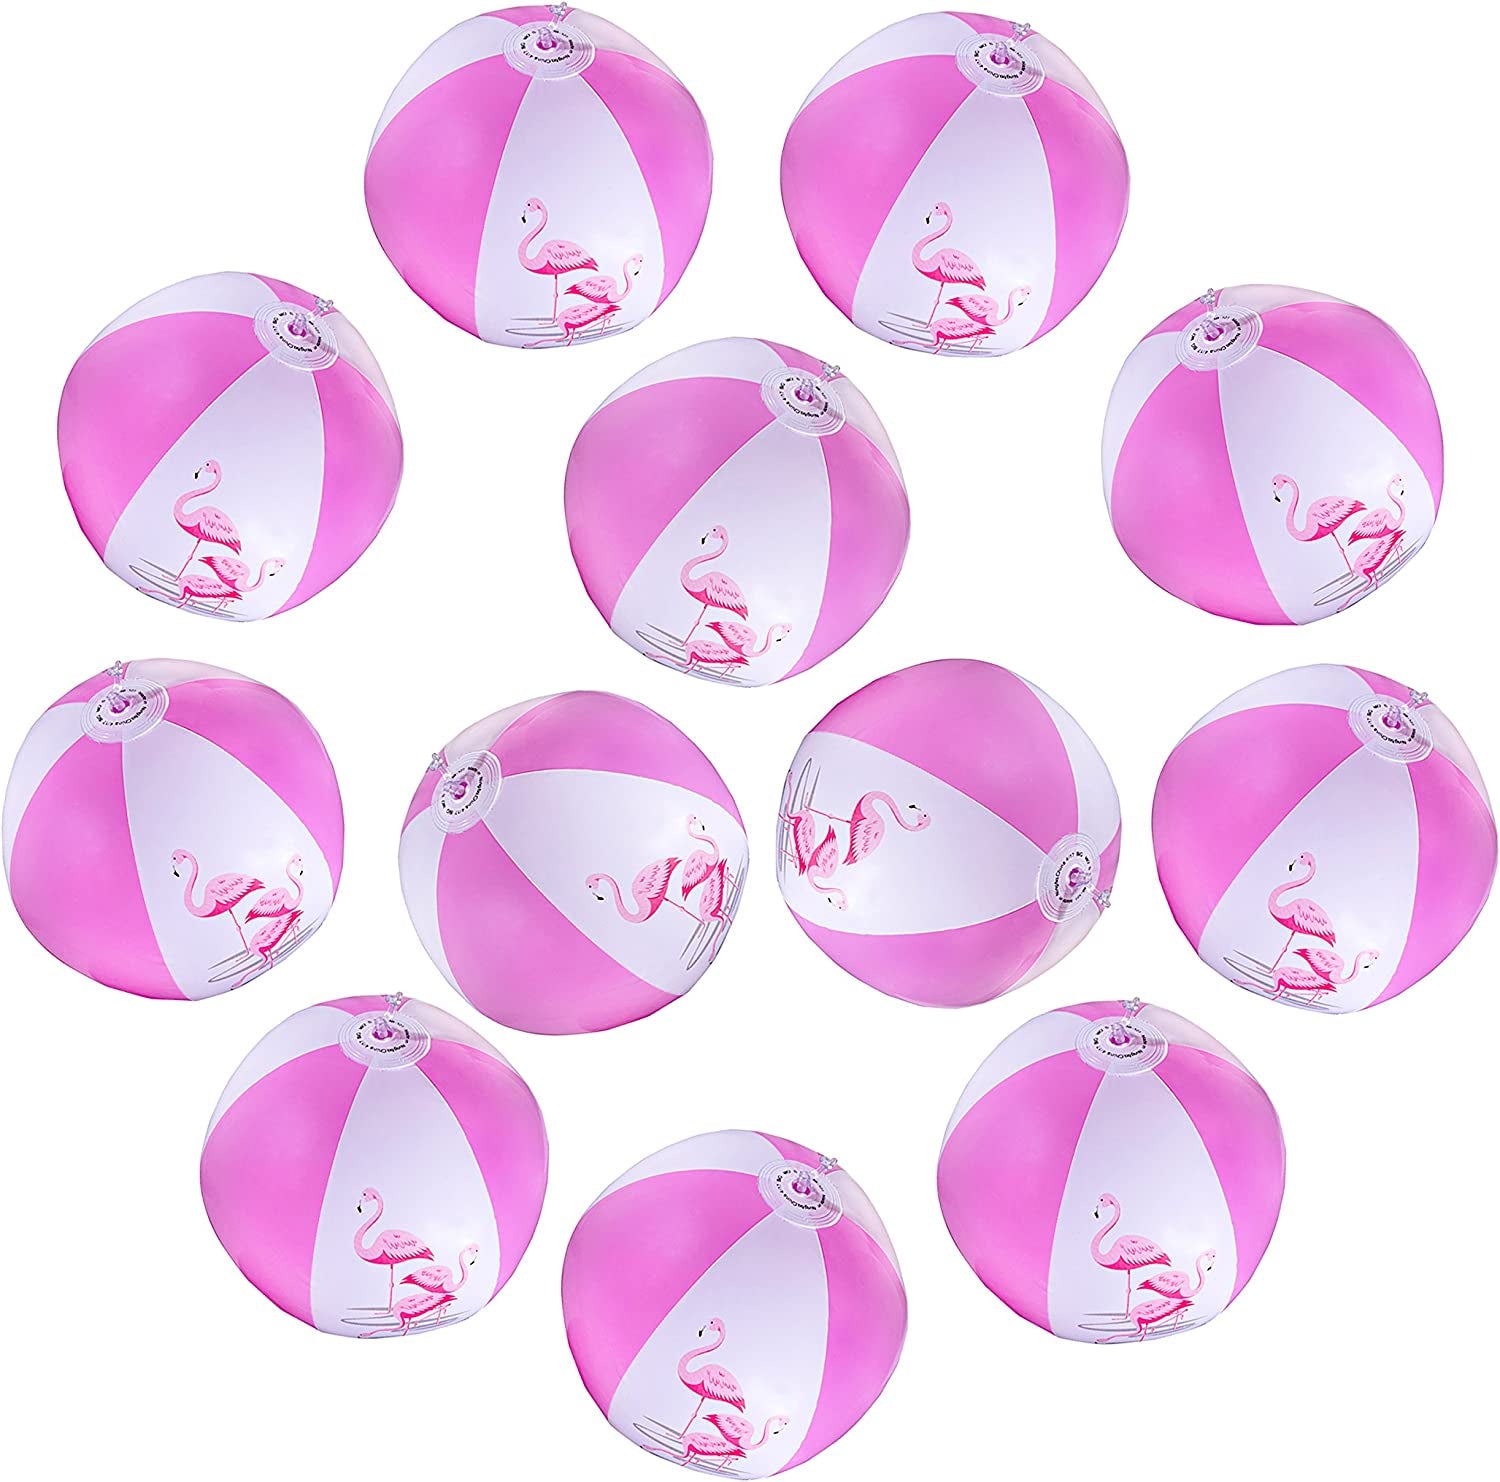 12" Pink Flamingo Party Pack Inflatable Beach Balls for Swimming, Beach Pool Pink/Flamingo Themed Party Toys (12 Pack)